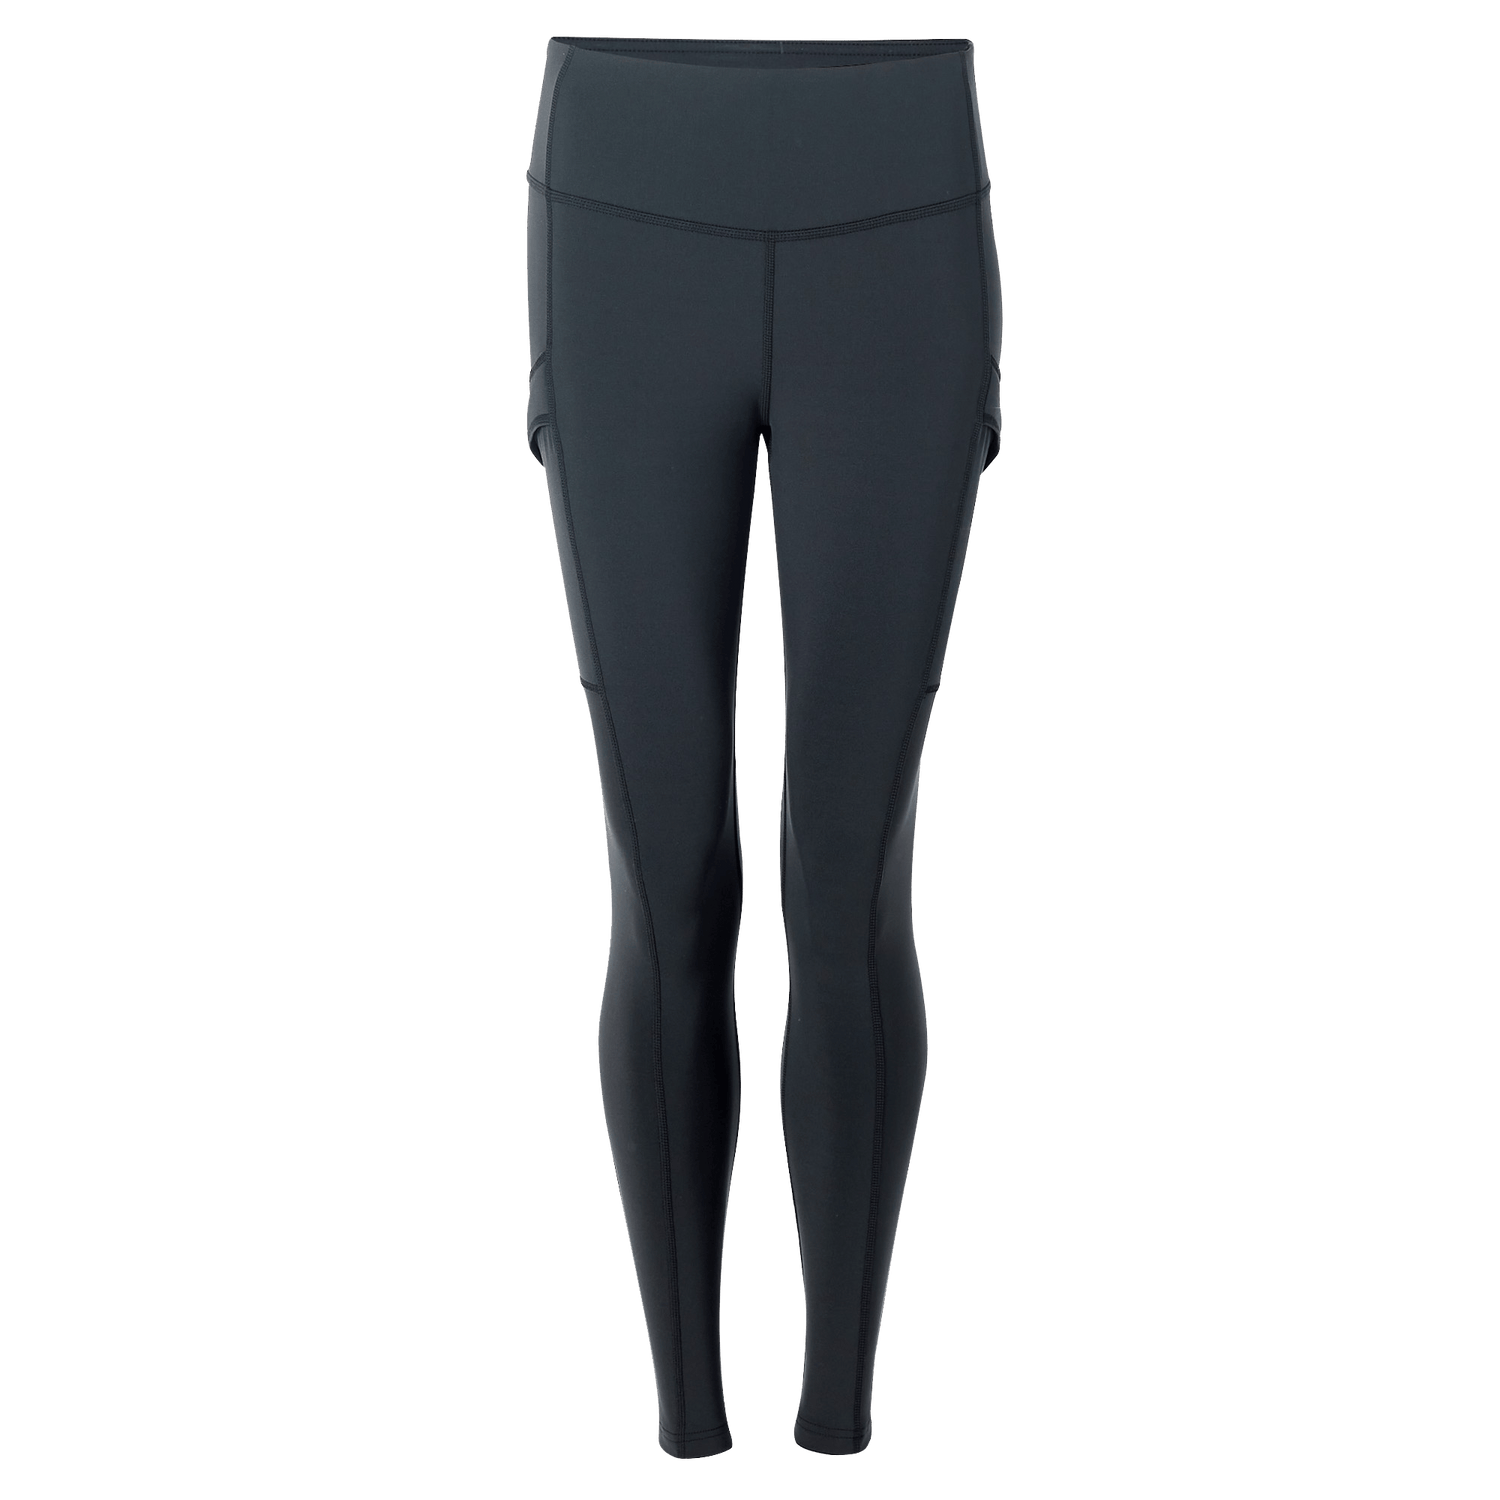 Sherpa - W's Nisha Tight - Recycled polyester - Weekendbee - sustainable sportswear